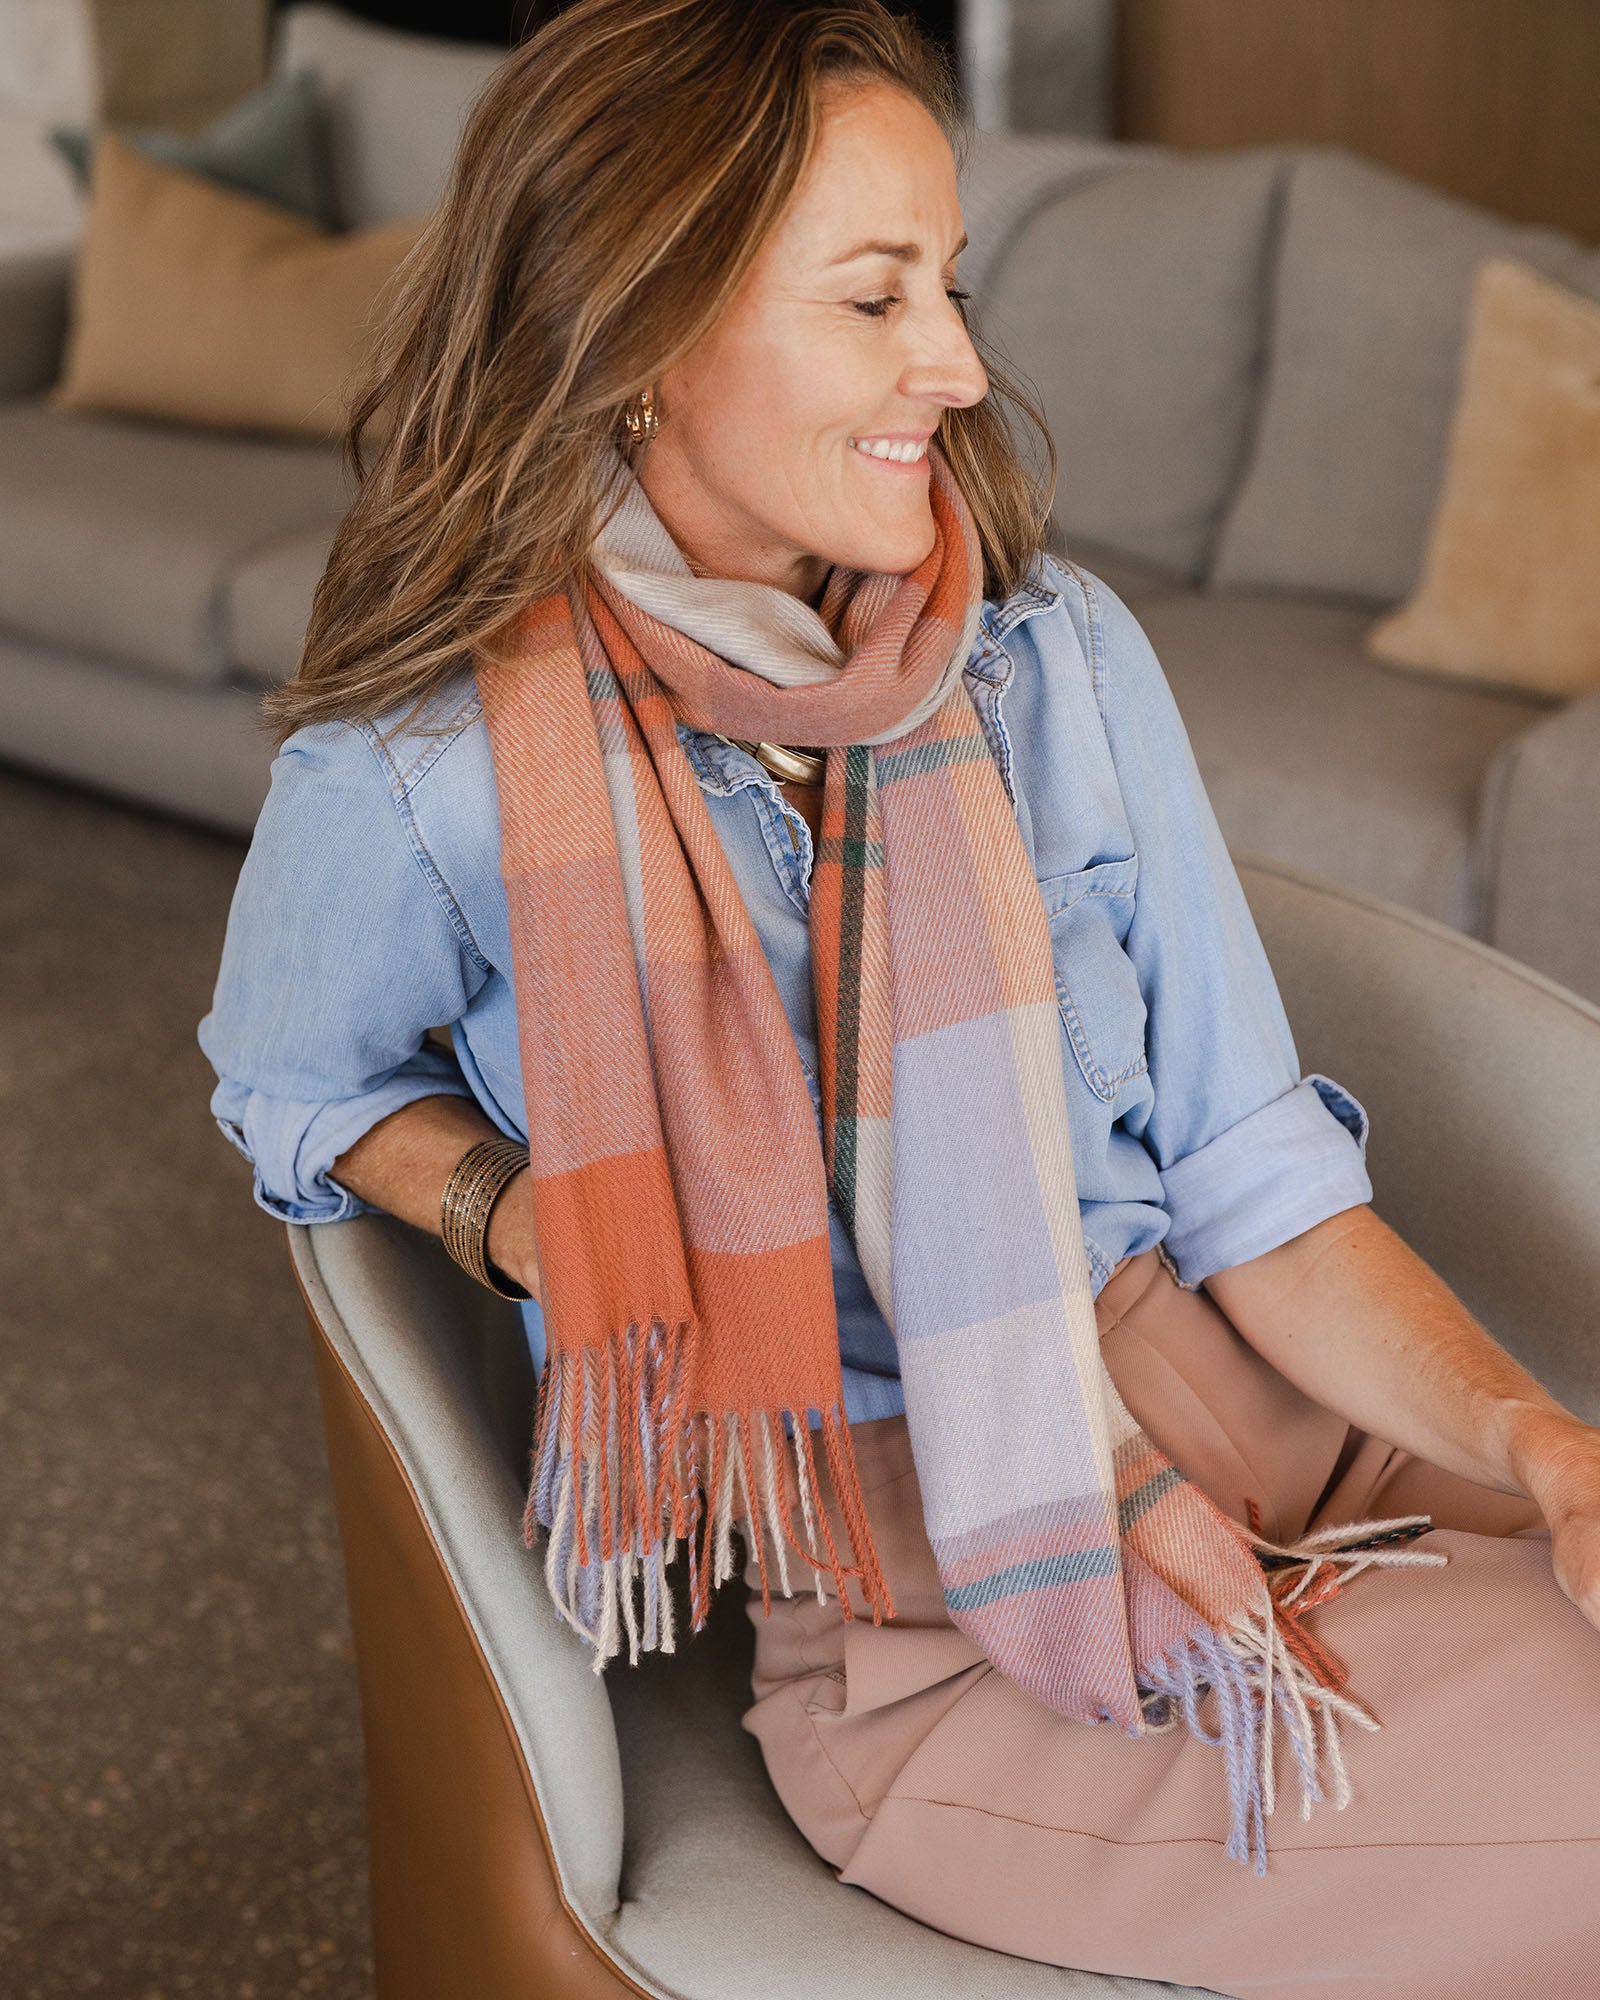 The Louenhide Balmoral Scarf features a cosy plaid pattern that adds a hint of colour to any wintery look.